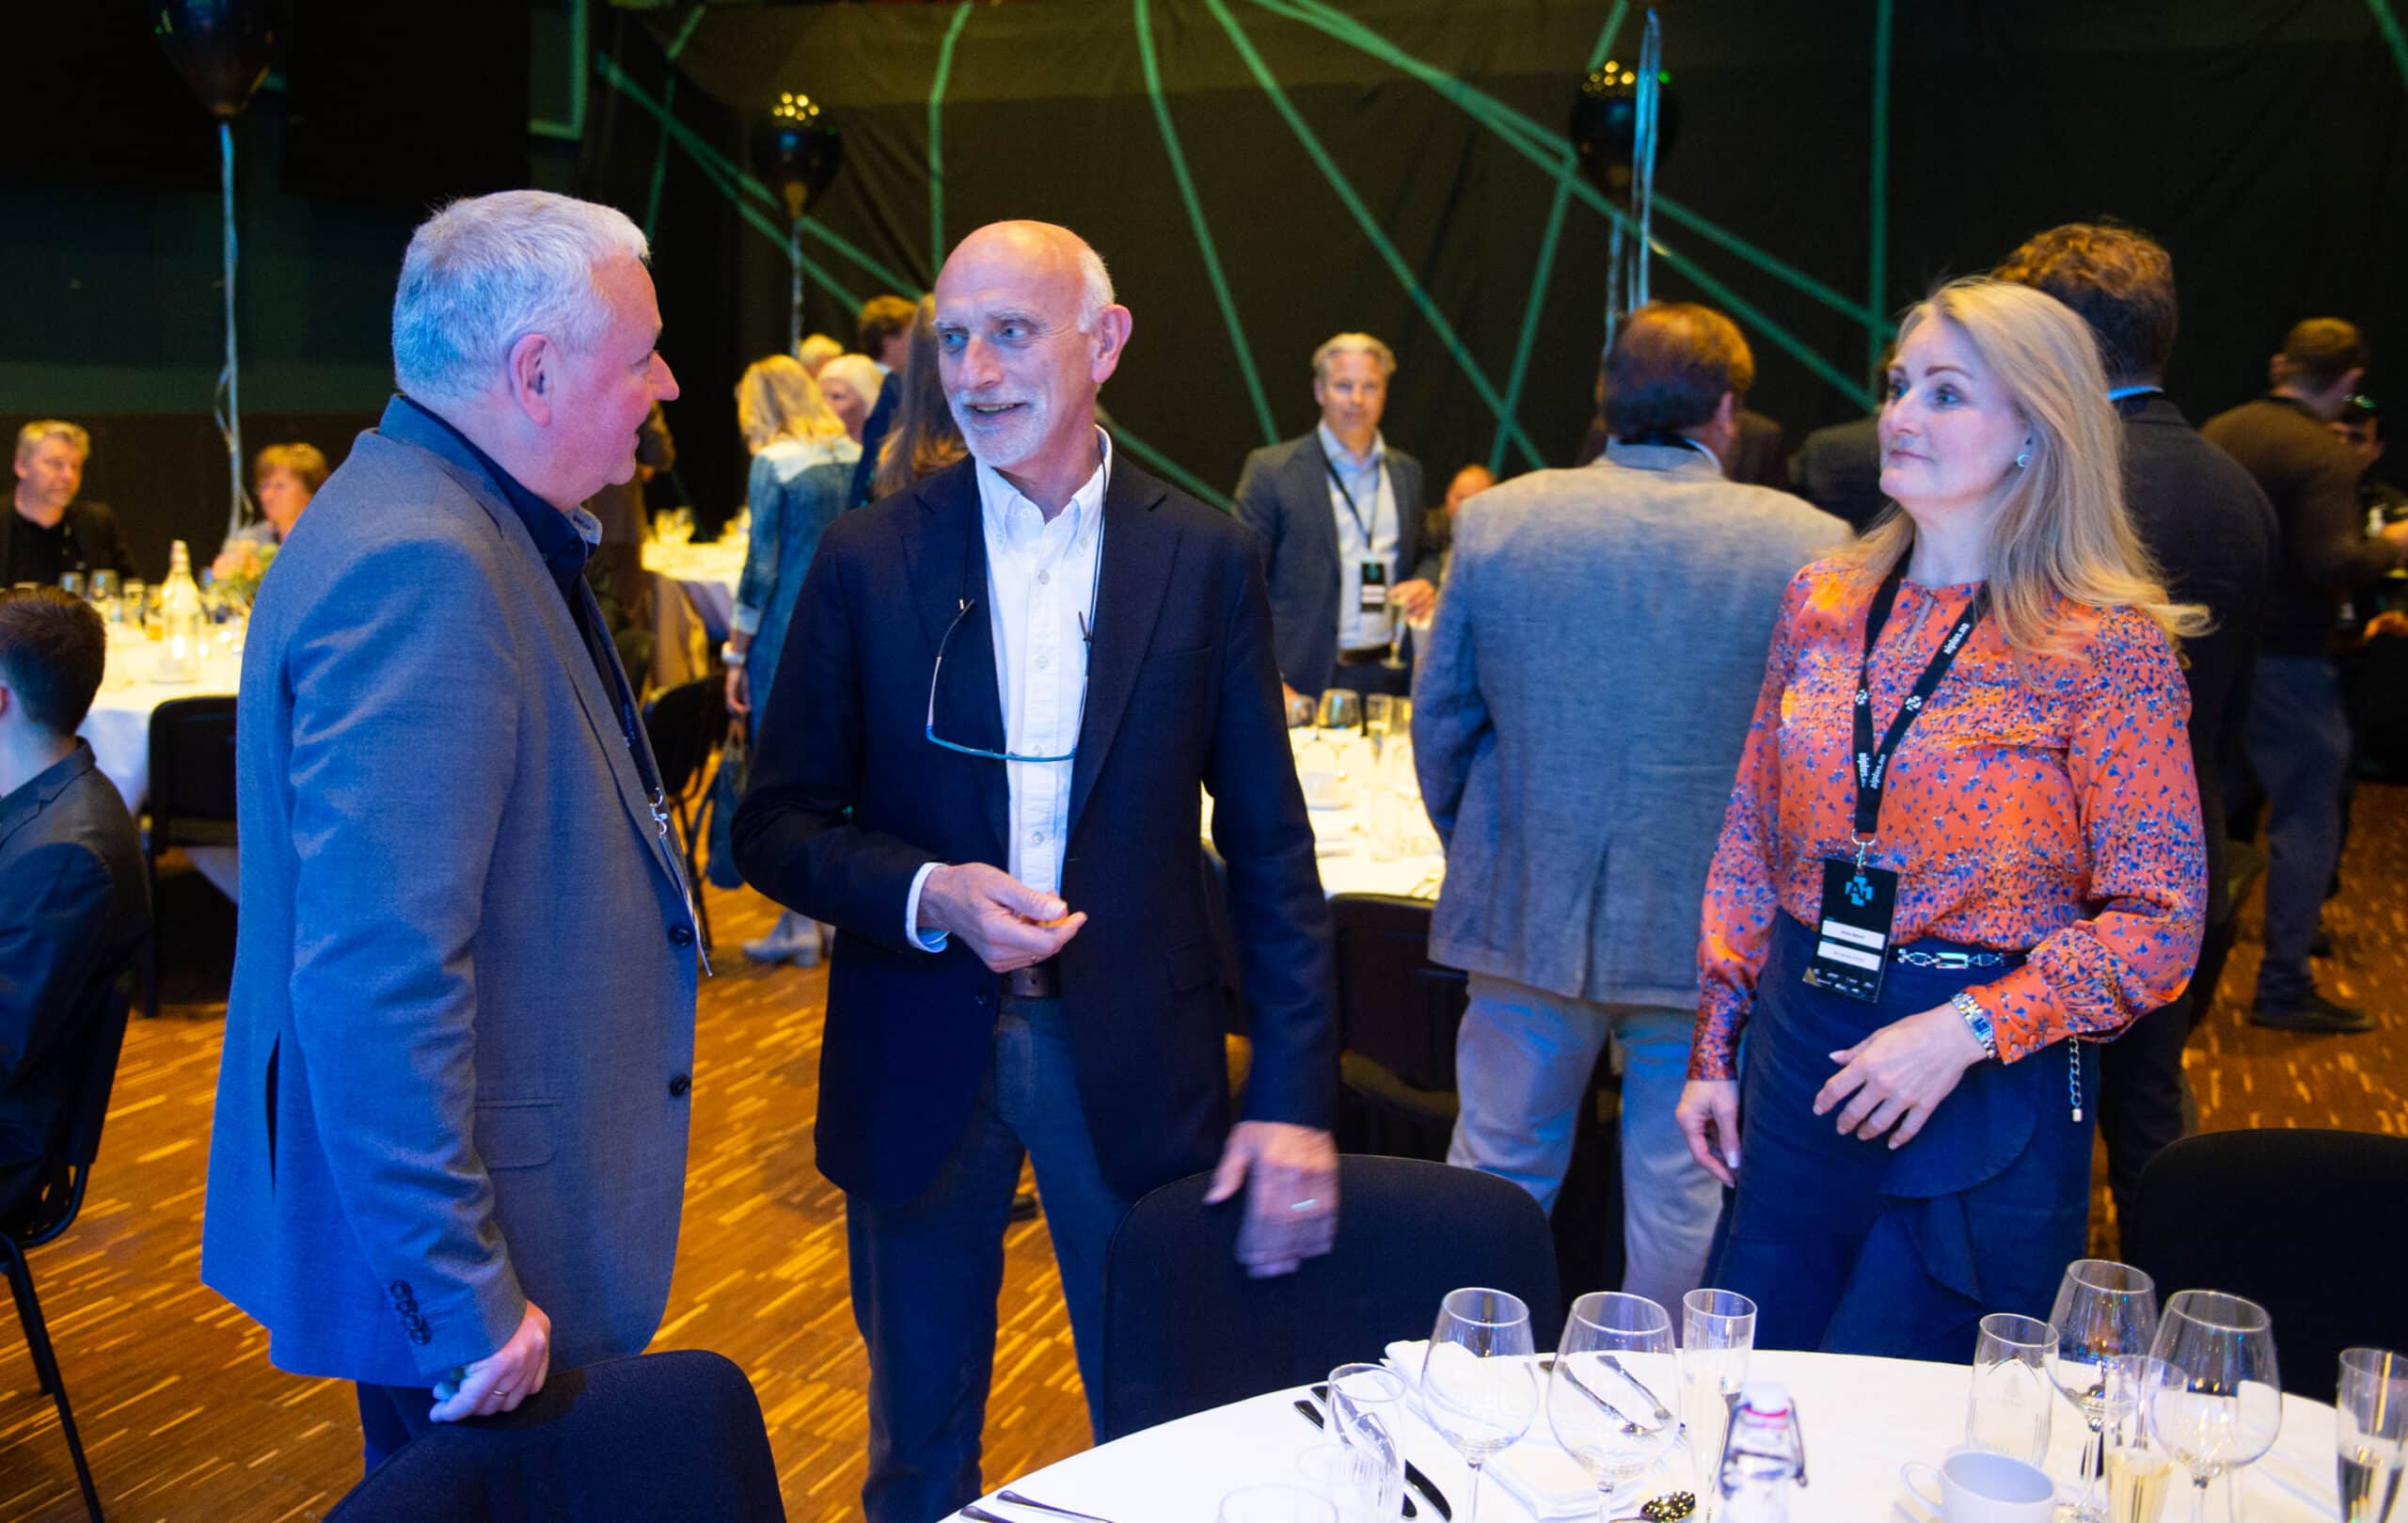 The chair of the Smart Innovation Norway board Ole Andreas Schärer (in the middle) was attending AI+ 2023. PHOTO: Stein Johnsen, Contentvideo.no